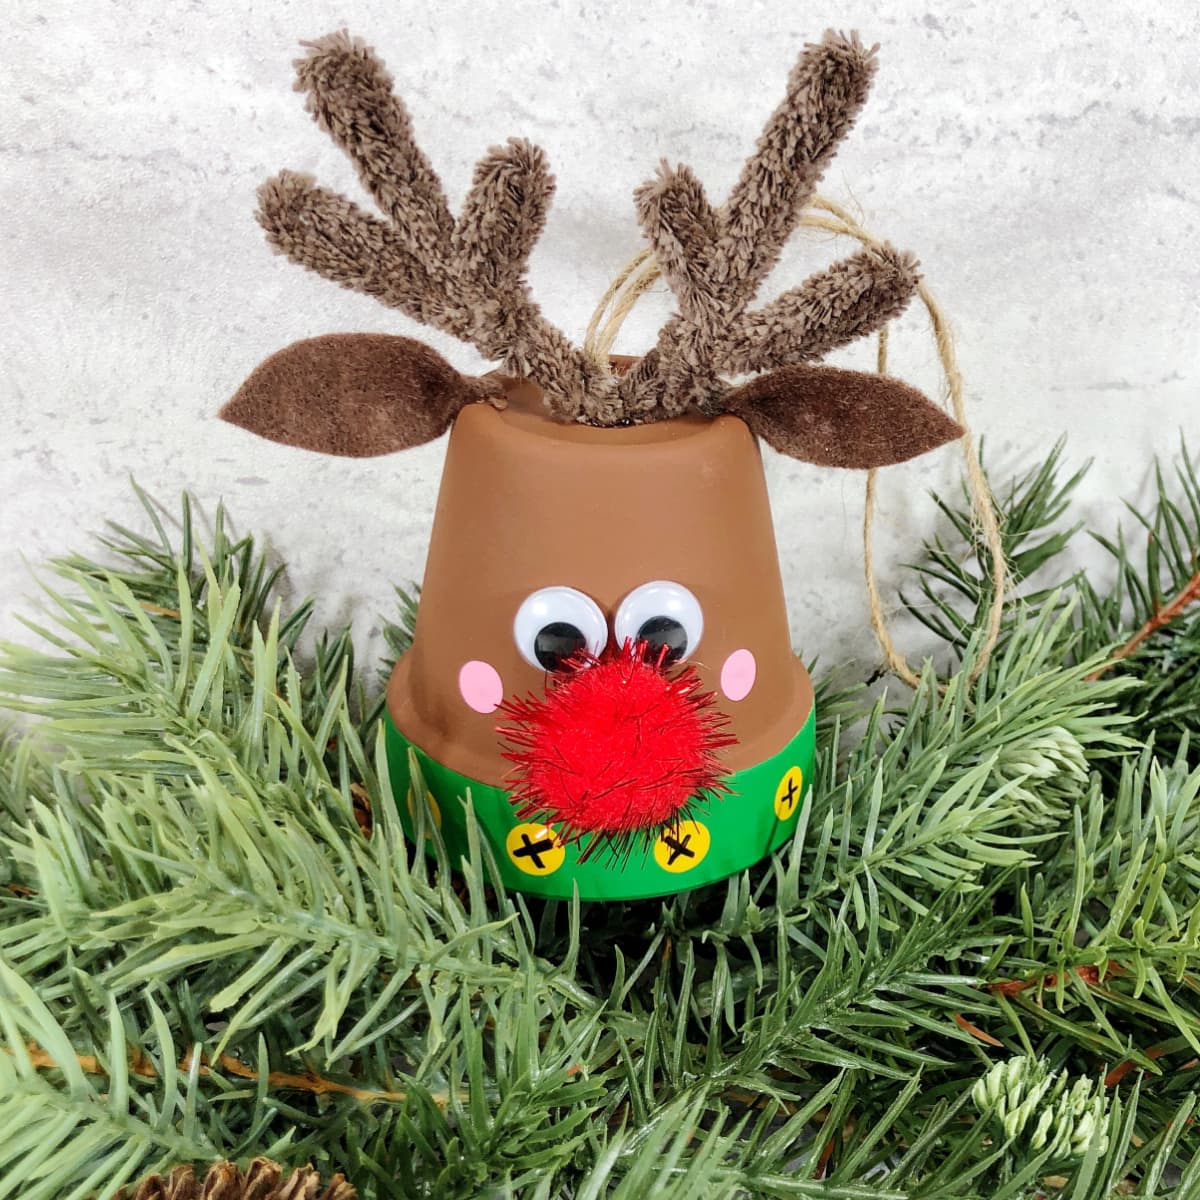 Clay pot reindeer ornament on pine branch